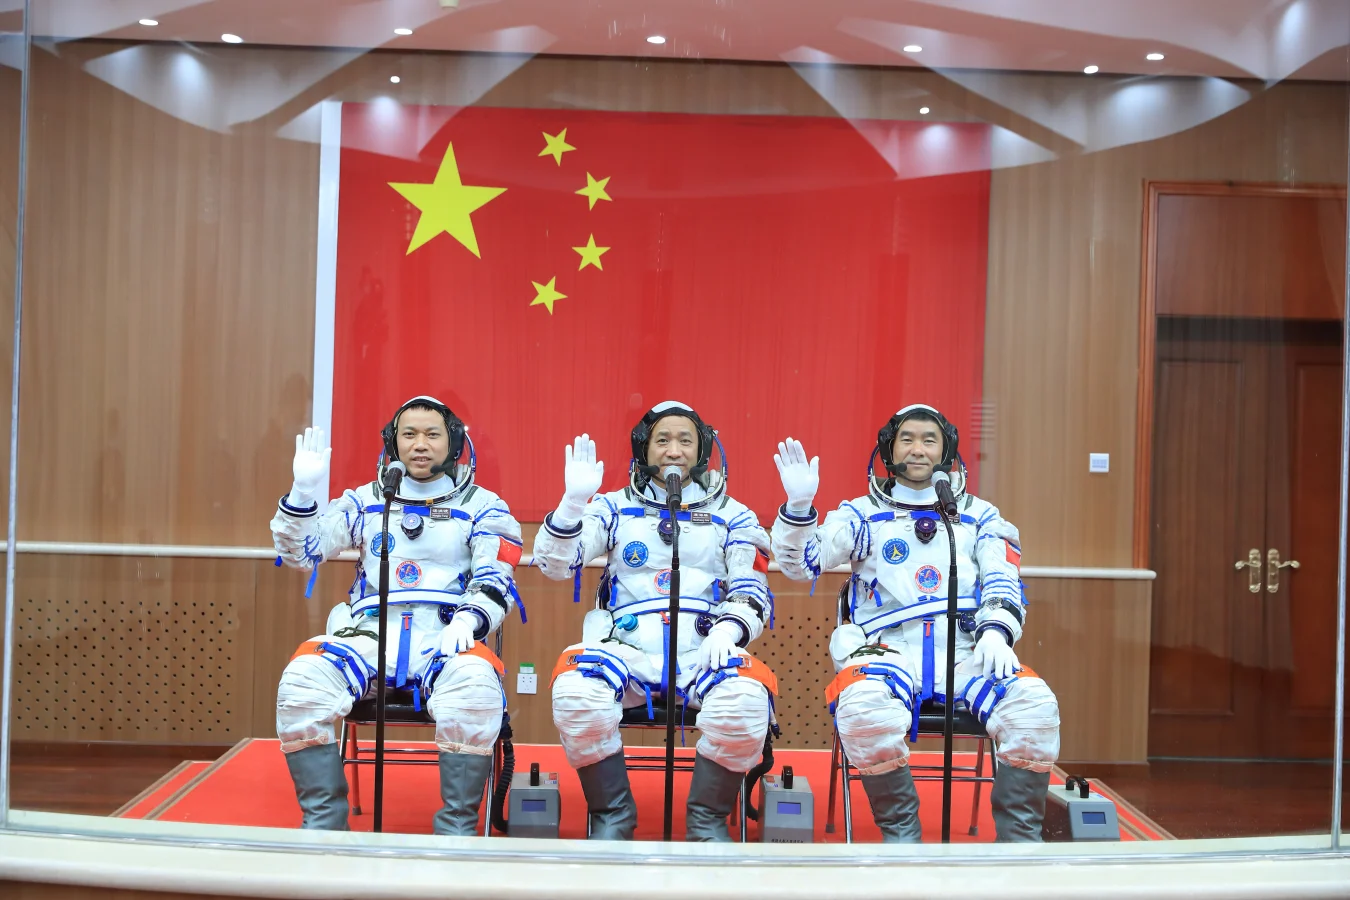 JIUQUAN, CHINA - JUNE 17: (L-R) Astronauts Tang Hongbo, Nie Haisheng and Liu Boming attend a see-off ceremony for Chinese astronauts of the Shenzhou-12 manned space mission at Jiuquan Satellite Launch Center on June 17, 2021 in Jiuquan, Gansu Province of China. China launches the Shenzhou-12 spacecraft, carried on the Long March-2F rocket, to Chinese Tiangong space station. (Photo by Yang Zhiyuan/VCG via Getty Images)